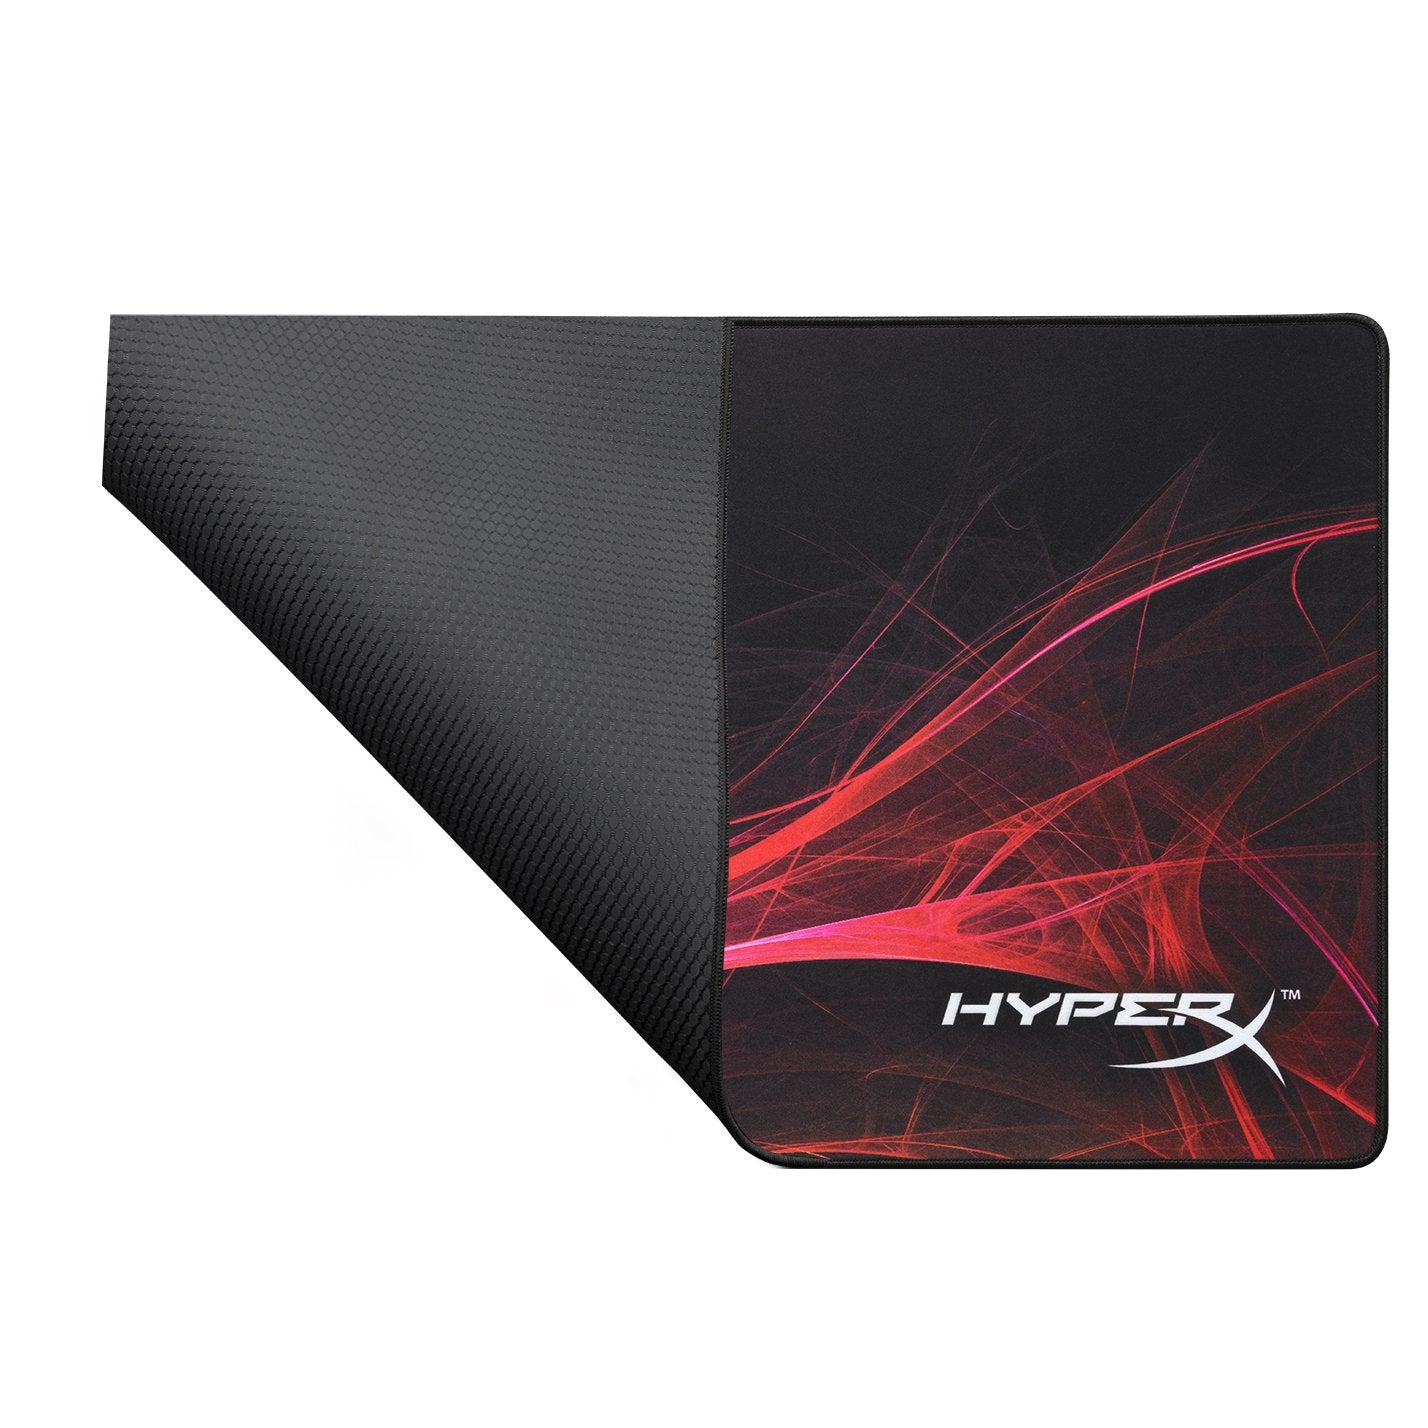 MOUSE-PAD-HYPERX-FURY-S-SPEED---EXTRA-LARGE-(HX-MPFS-S-XL)